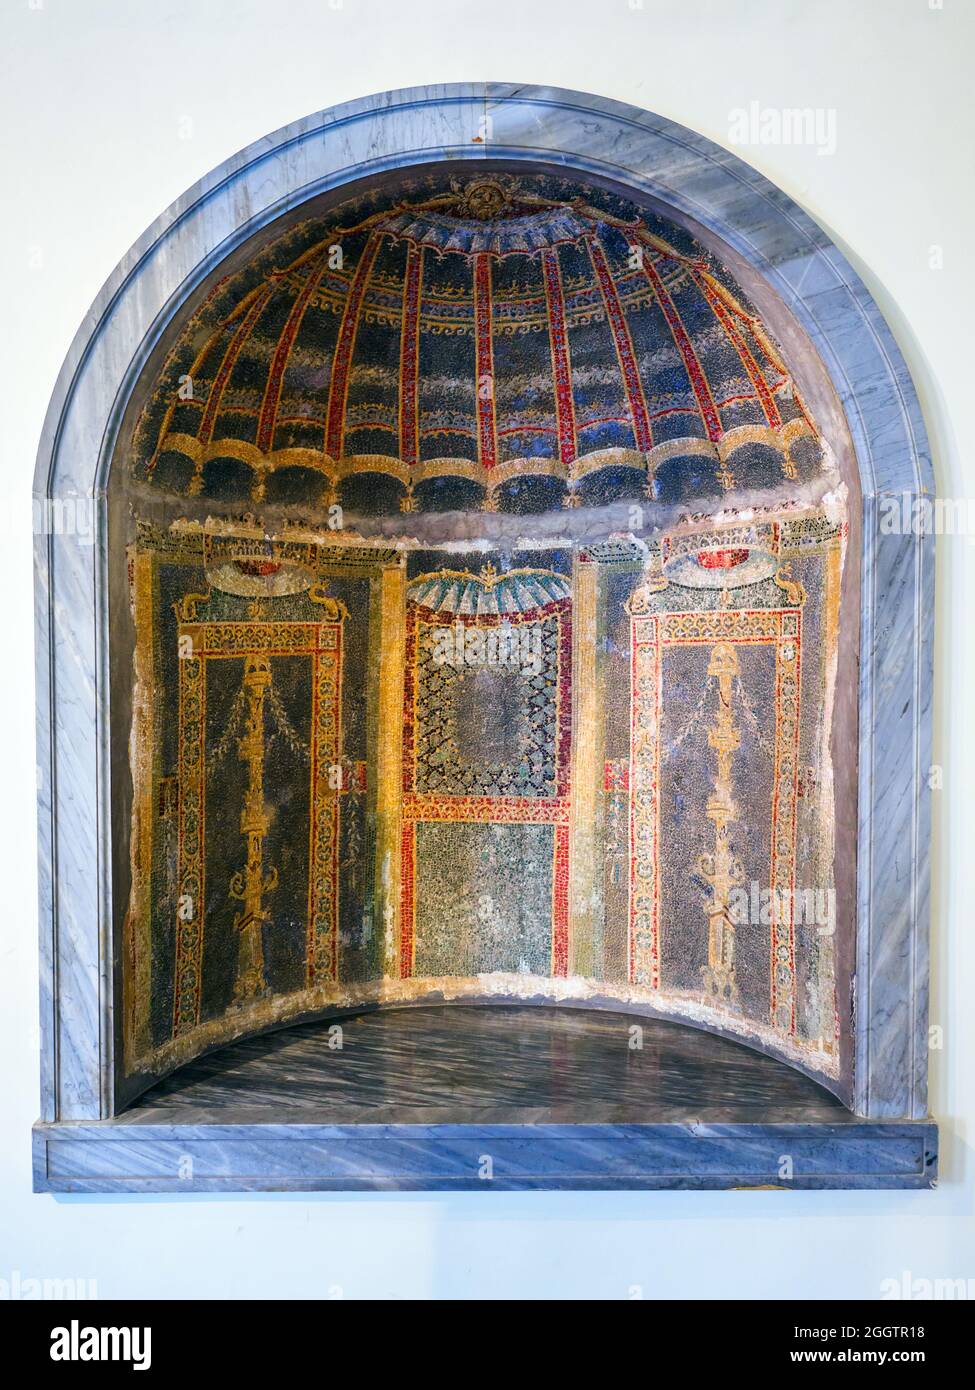 Niche of a nymphaeum. Niche is set in the wall of a nymphaeum, covered in polychrome glass paste tesserae. The drum of the niche is decorated in the form of a seashell, while the walls are adorned with panels showing candelabra from which wreaths hang. Herculaneum, Casa dello Scheletro (house of the Skeleton). Third quarter of the 1st Century AD. Stock Photo